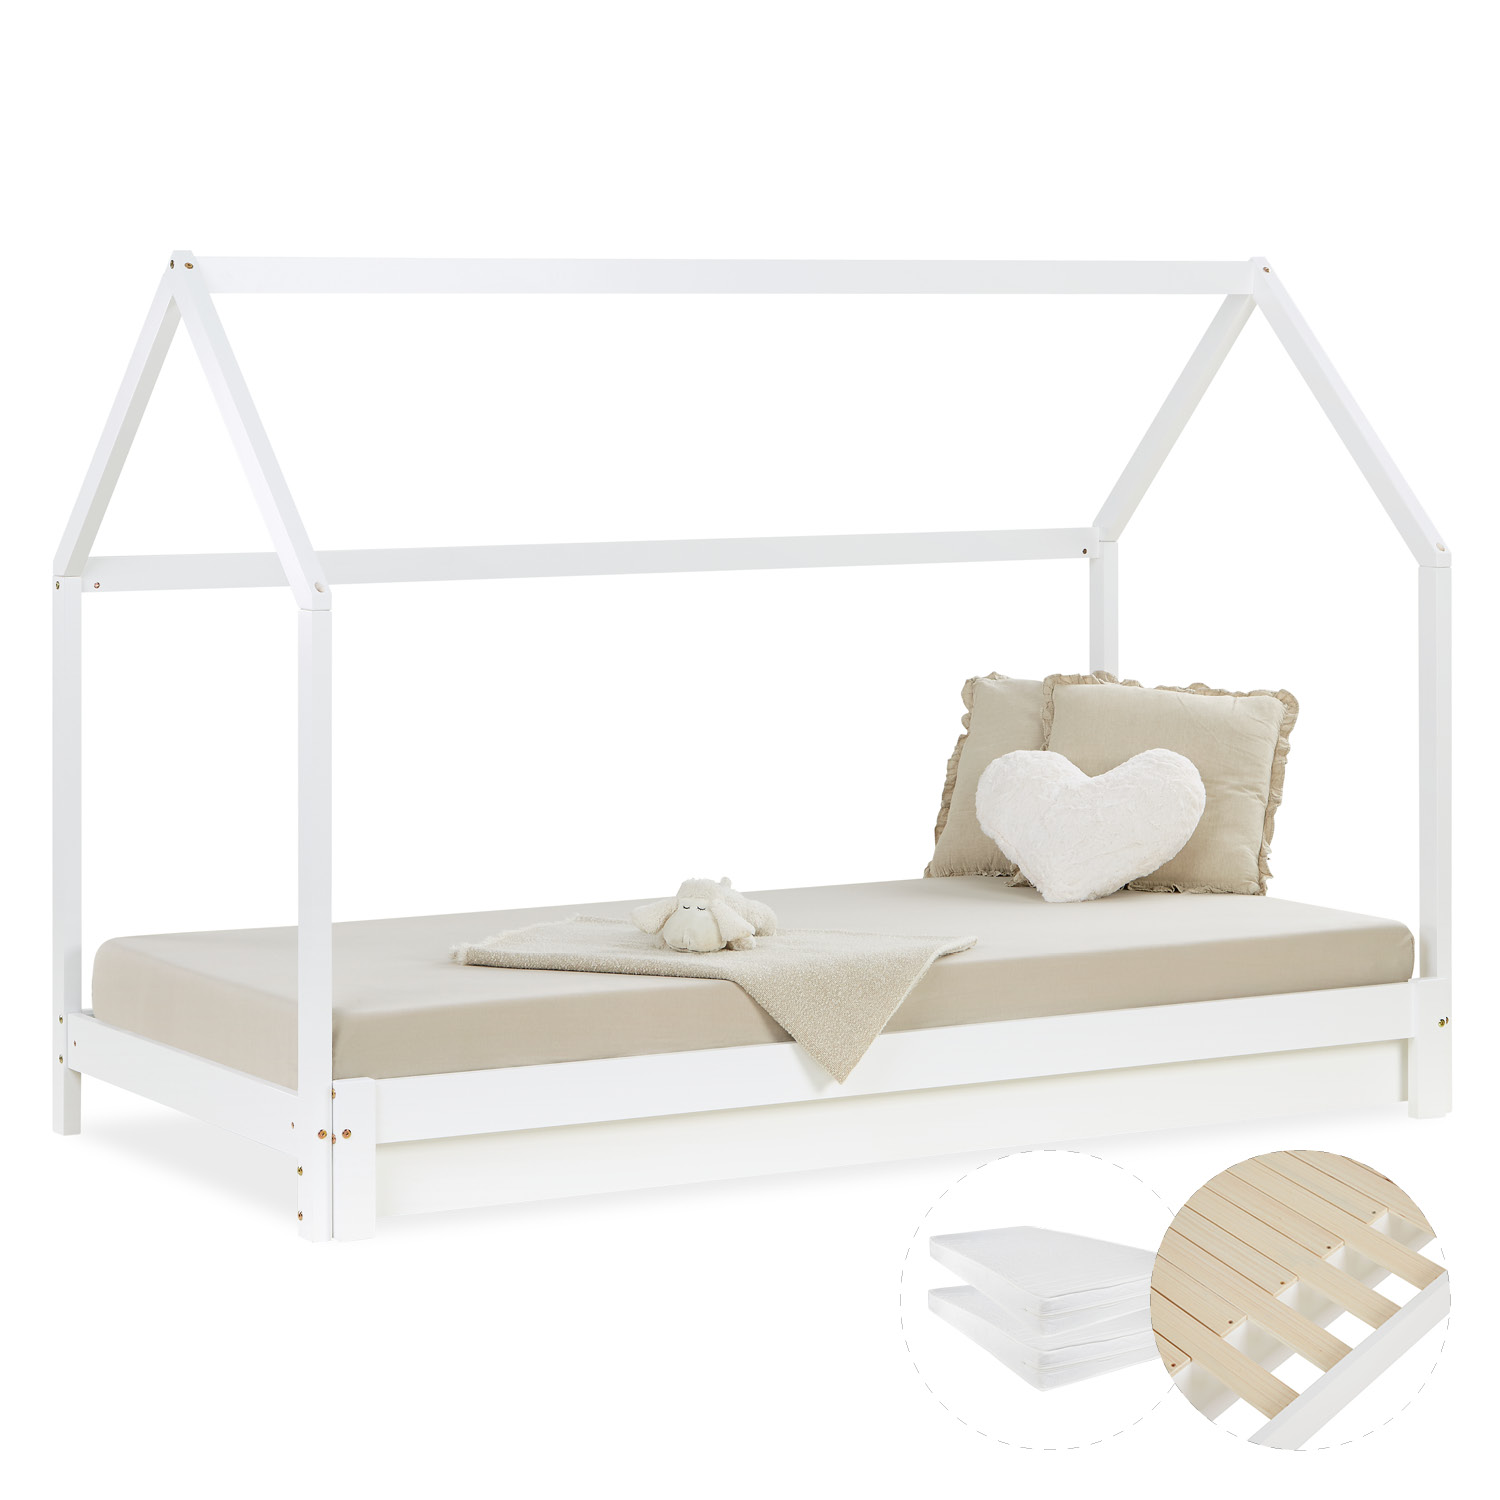 Children's Bed with Pull Out Bed 2 Mattresses 90x200 cm House Bed Treehouse Bed Children's Single Bed Wooden Frame White Trundle Bed Slats